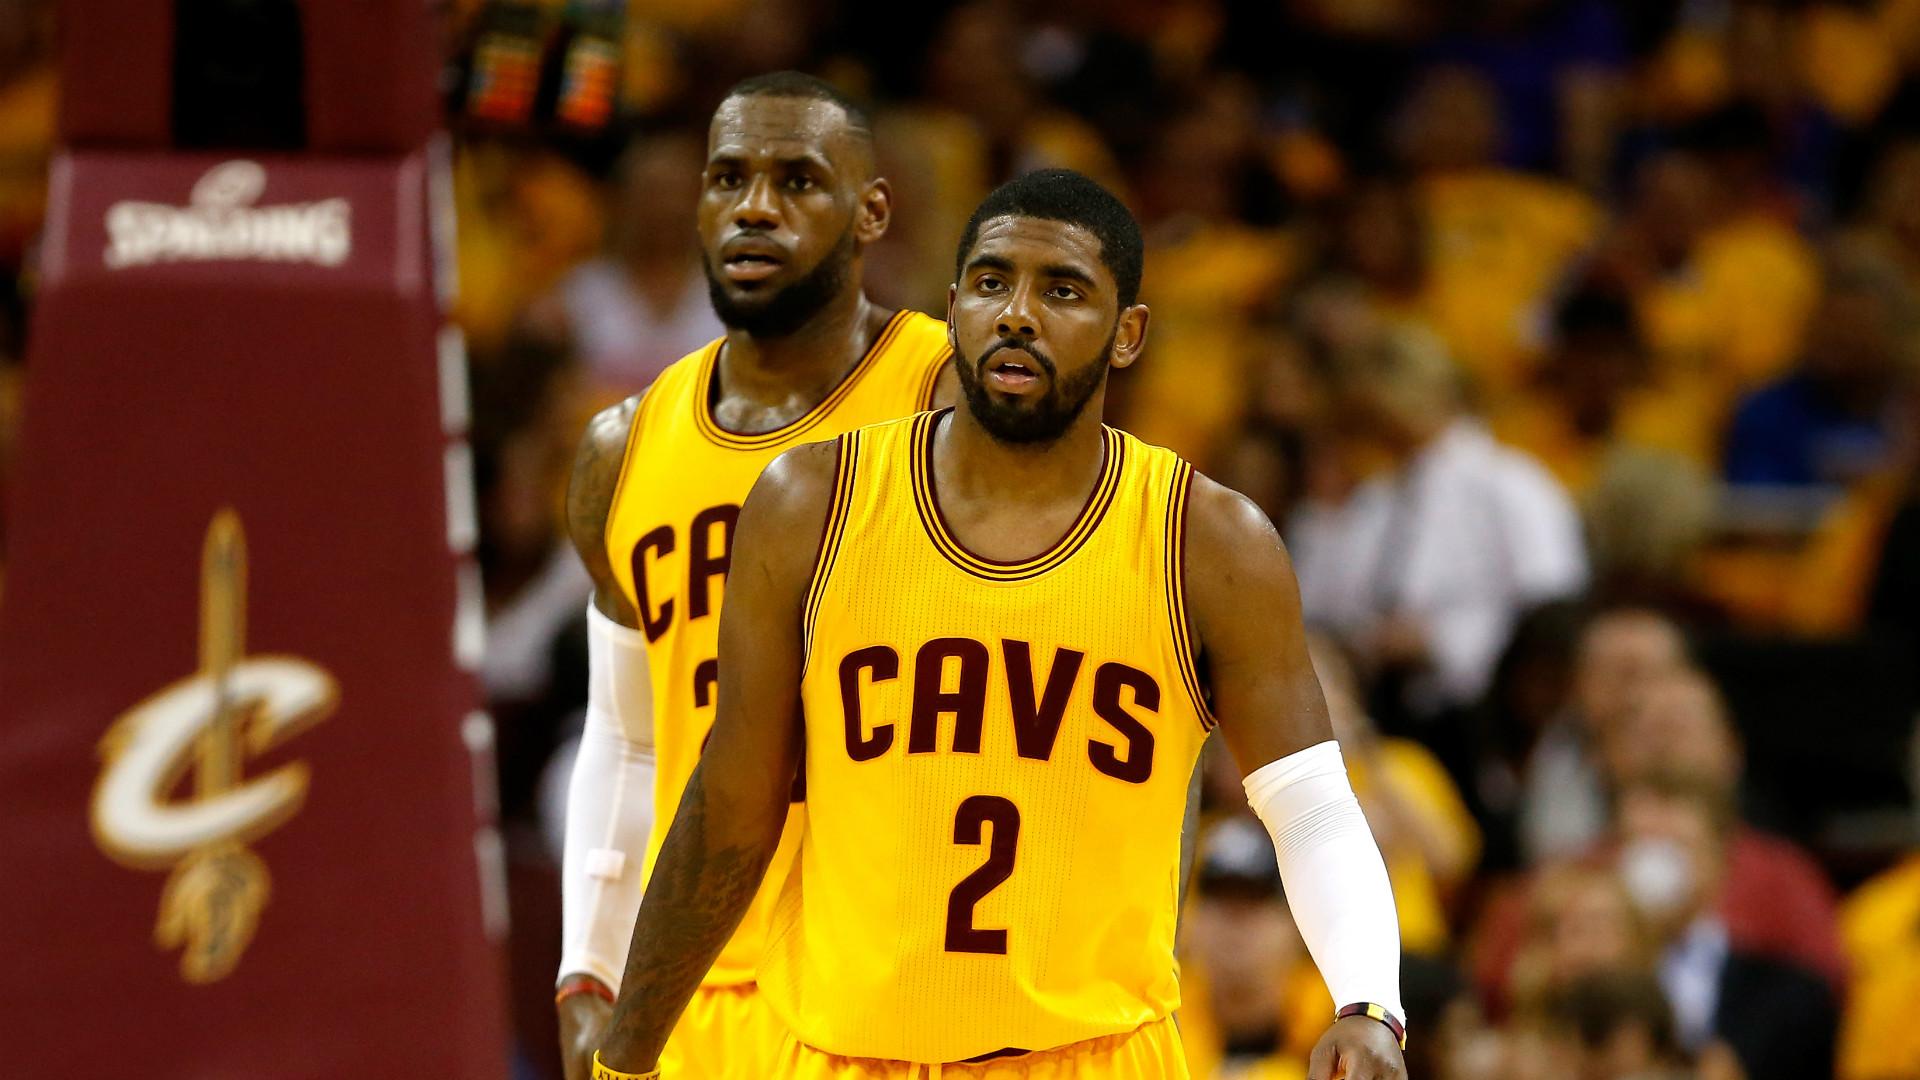 Kyrie Irving didn't want LeBron James to return to Cavs.